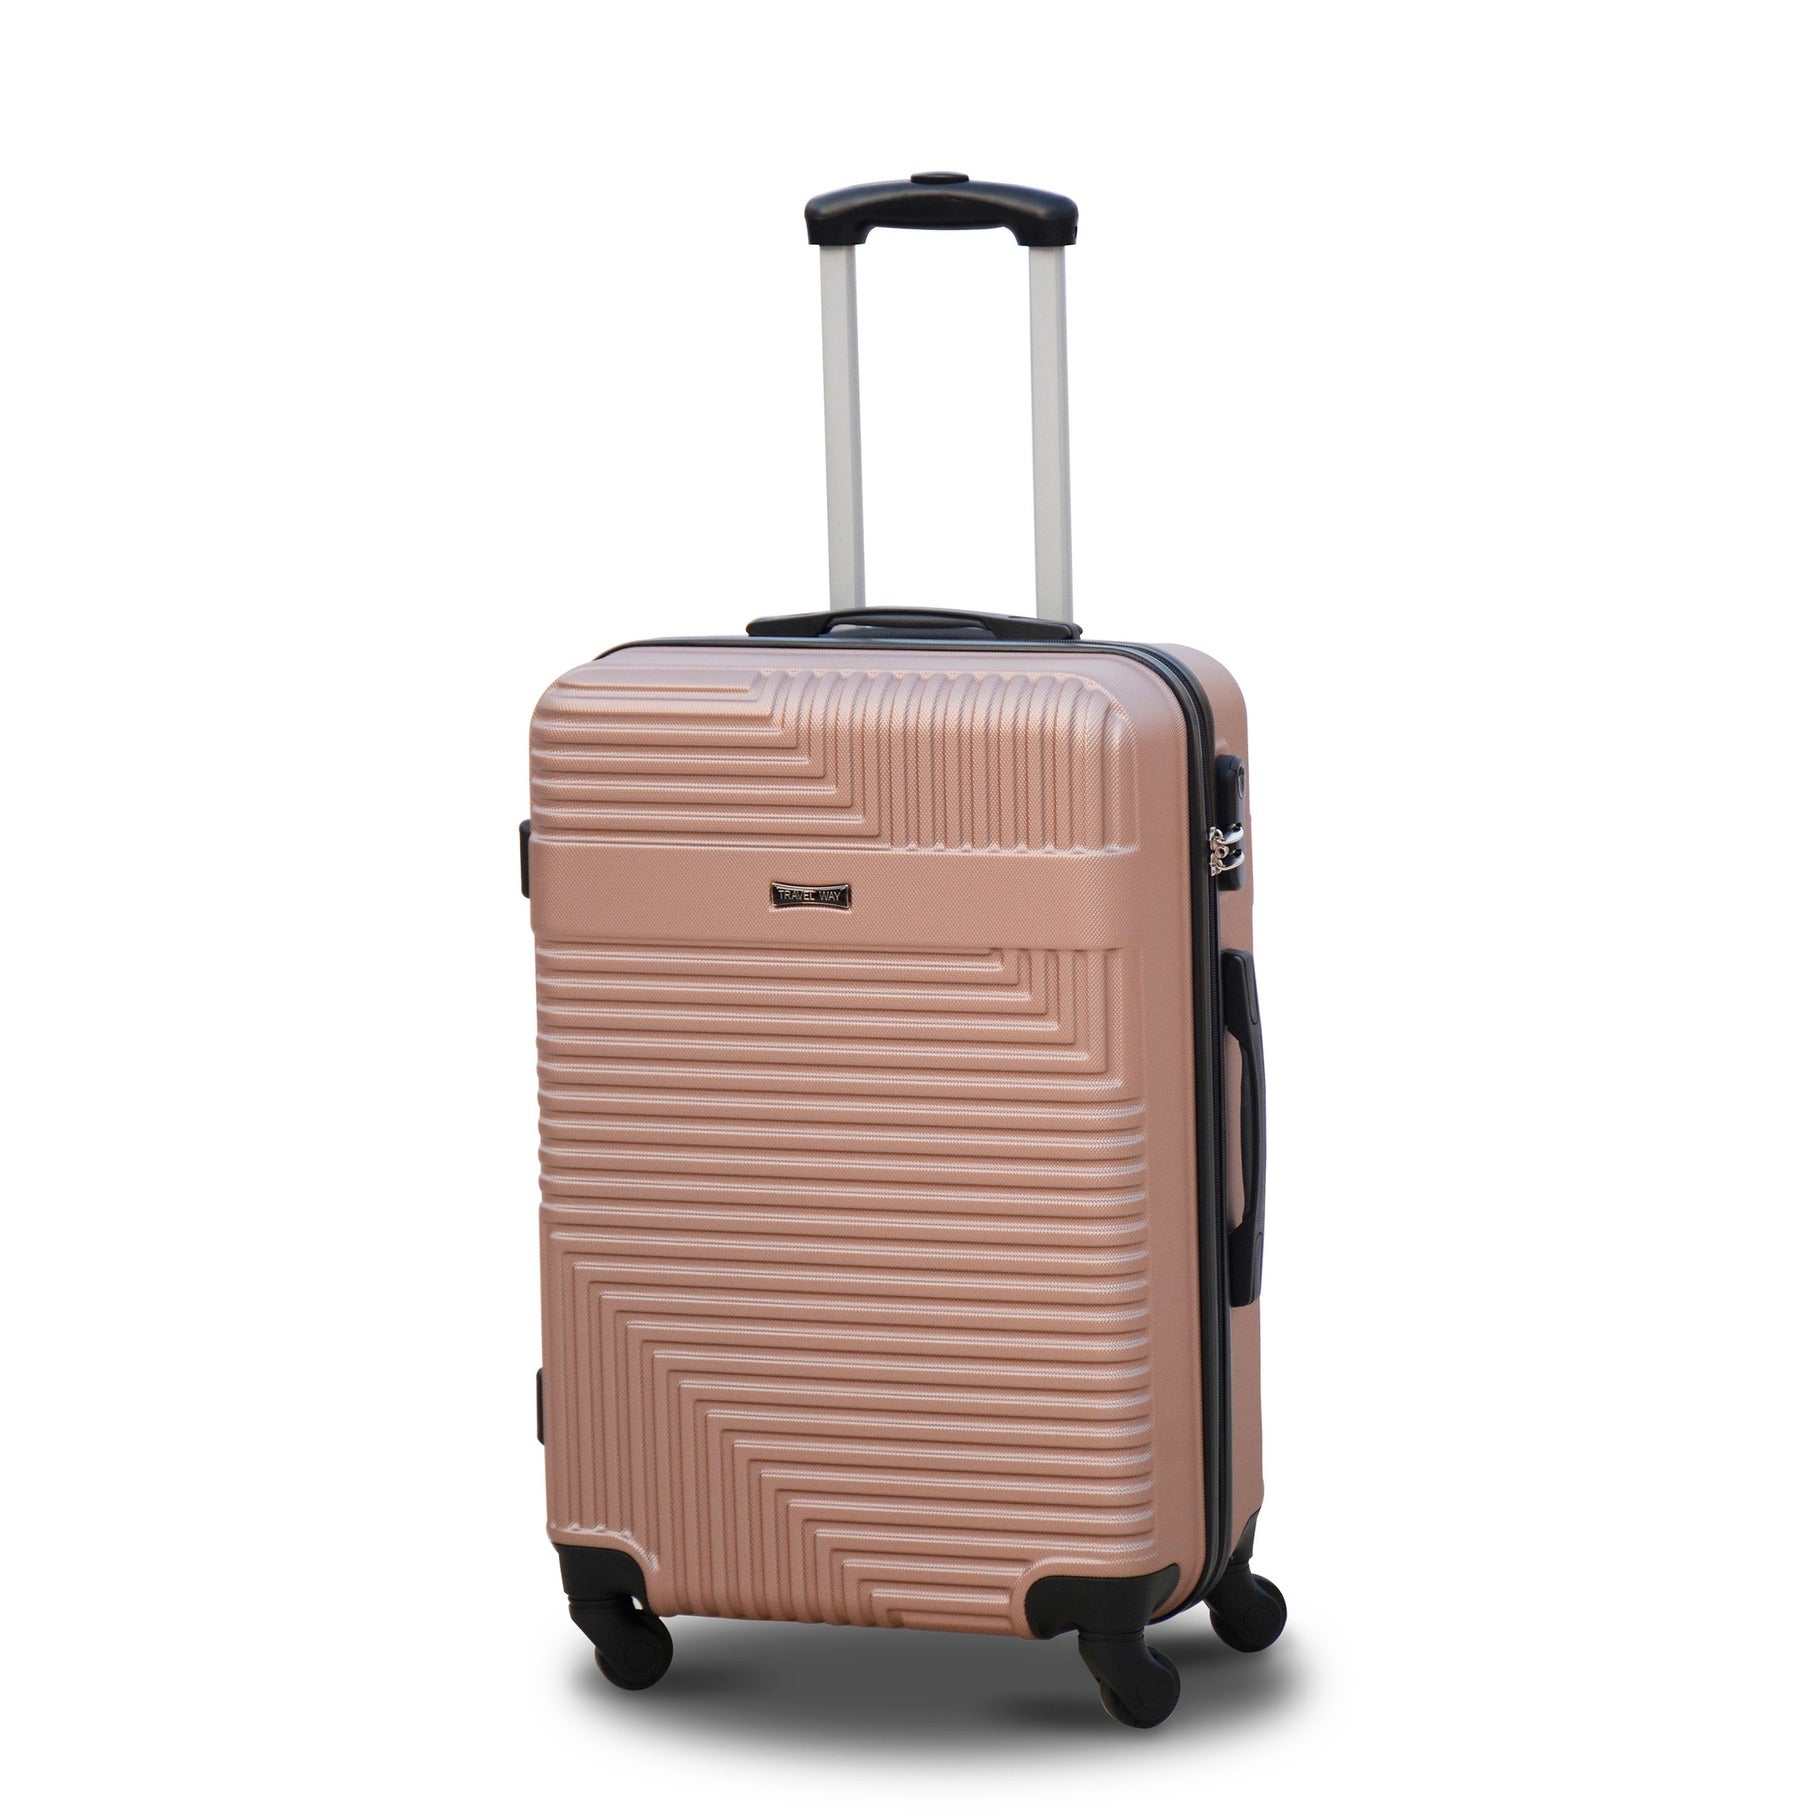 24" Rose Gold Colour Travel Way ABS Luggage Lightweight Hard Case Trolley Bag Zaappy.com